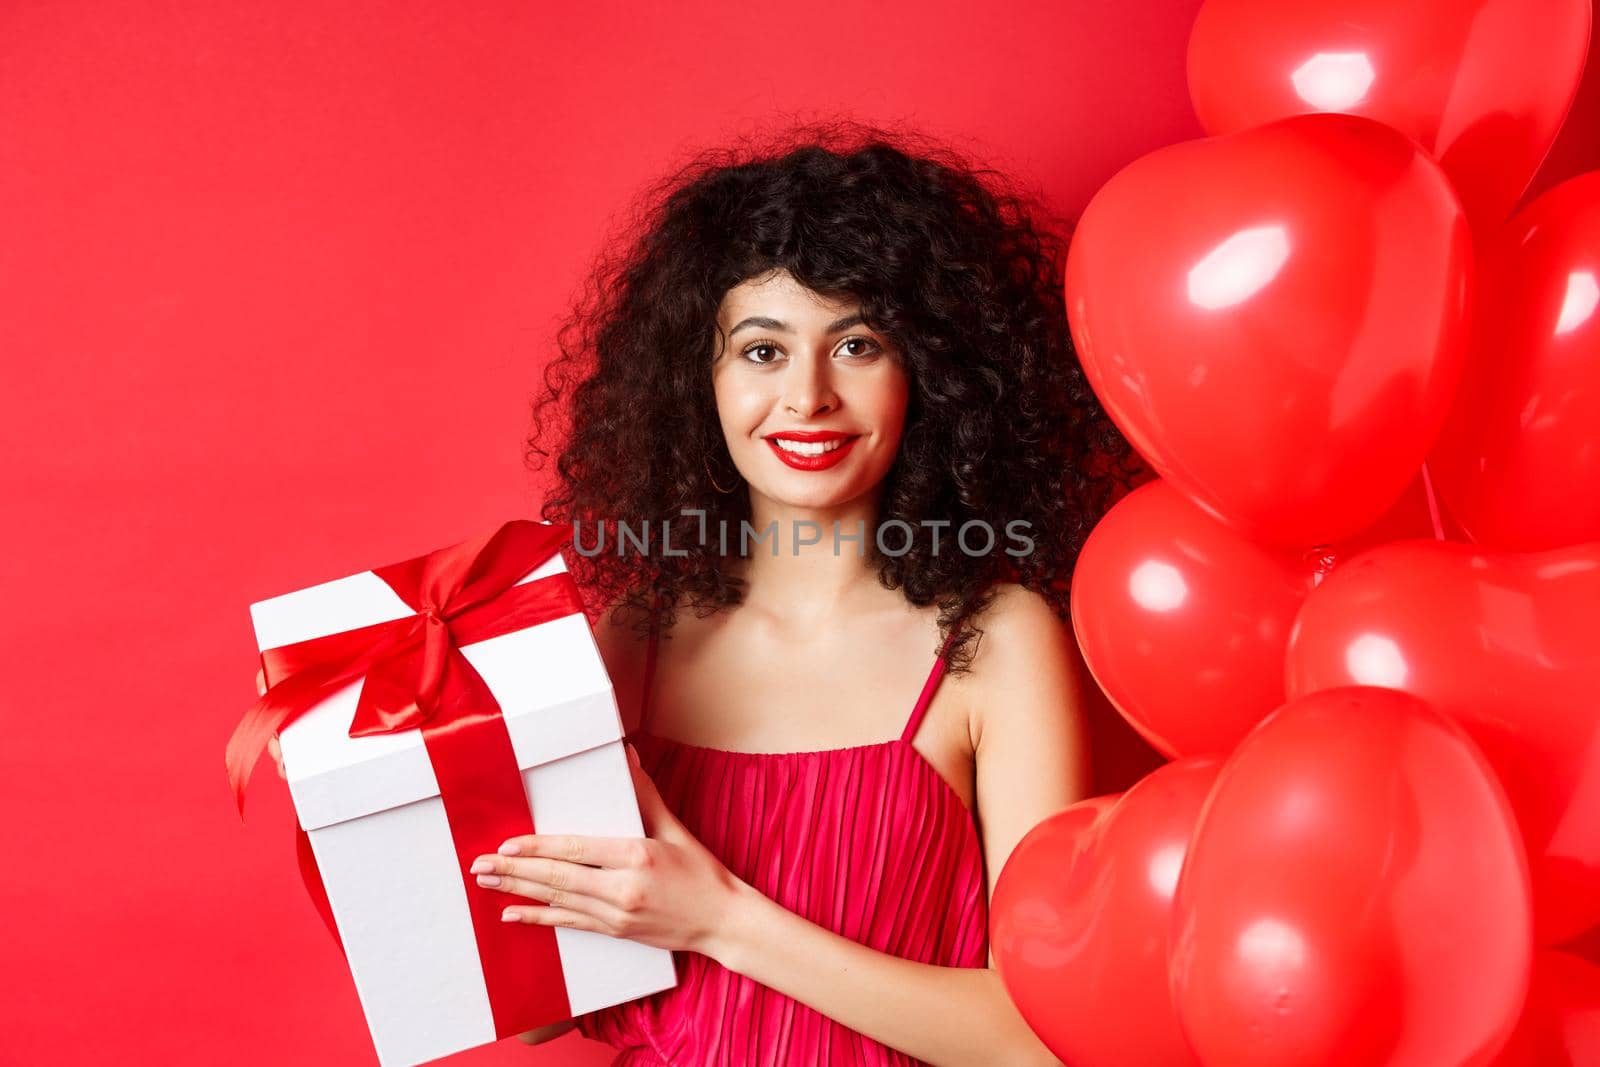 Holidays and celebration. Beautiful woman with curly hair, standing near heart balloons, holding gift box and smiling happy, white background by Benzoix